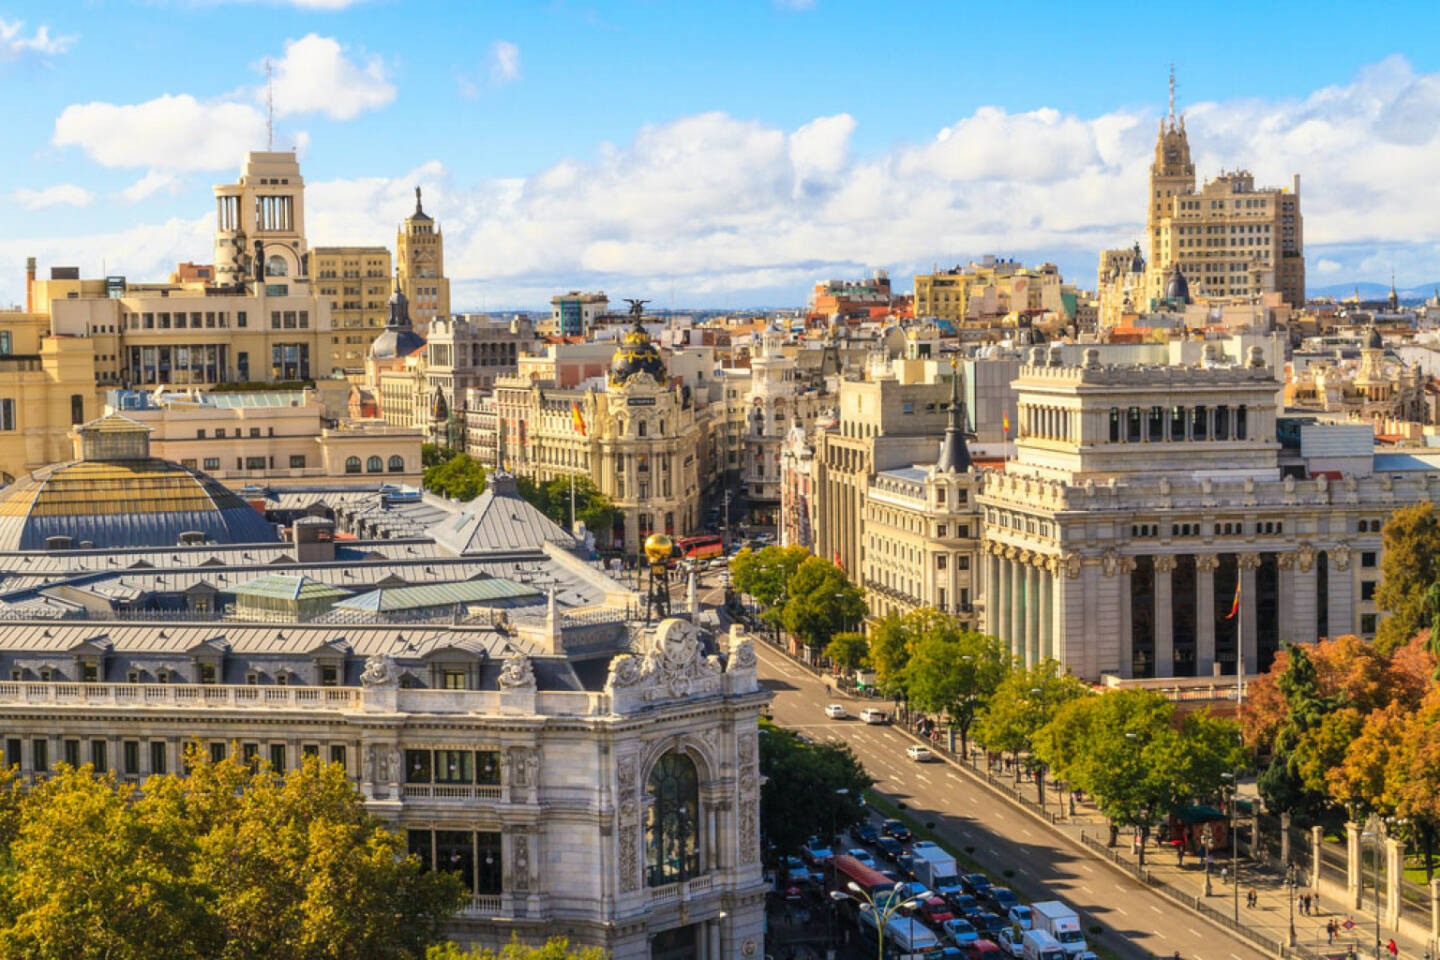 Madrid, Spanien, http://www.shutterstock.com/de/pic-146707415/stock-photo-madrid-cityscape-and-aerial-view-of-of-gran-via-shopping-street-spain.html 